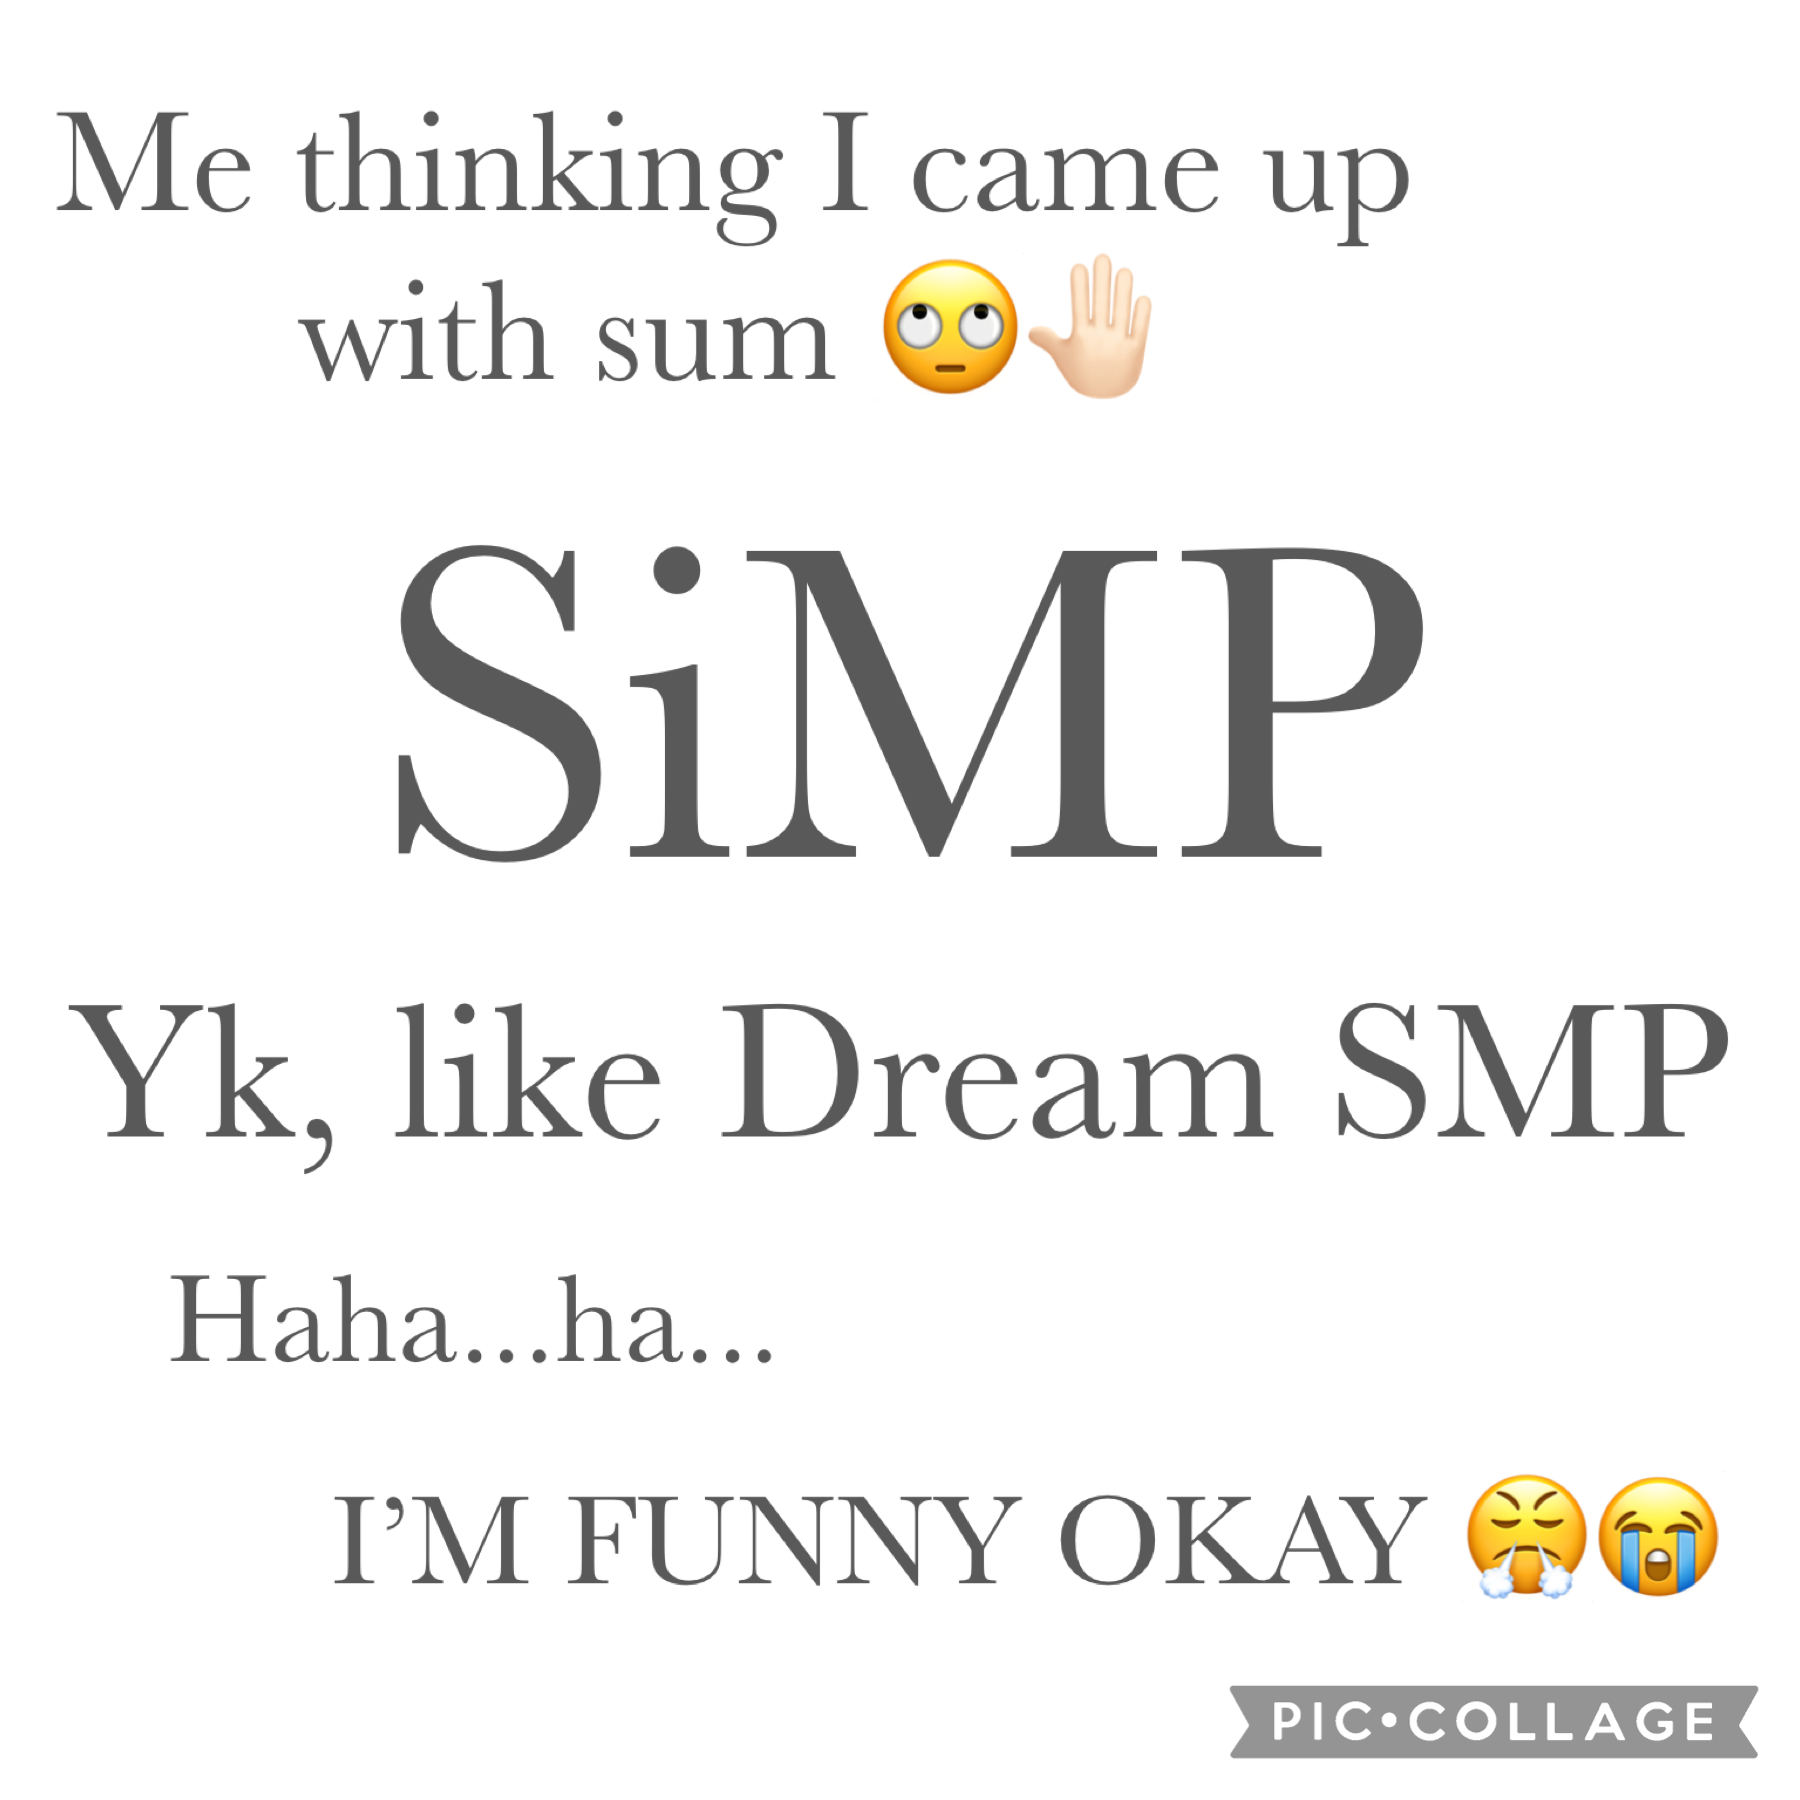 Seriously, whenever I see Dream SMP, I always think Dream SiMP or smth